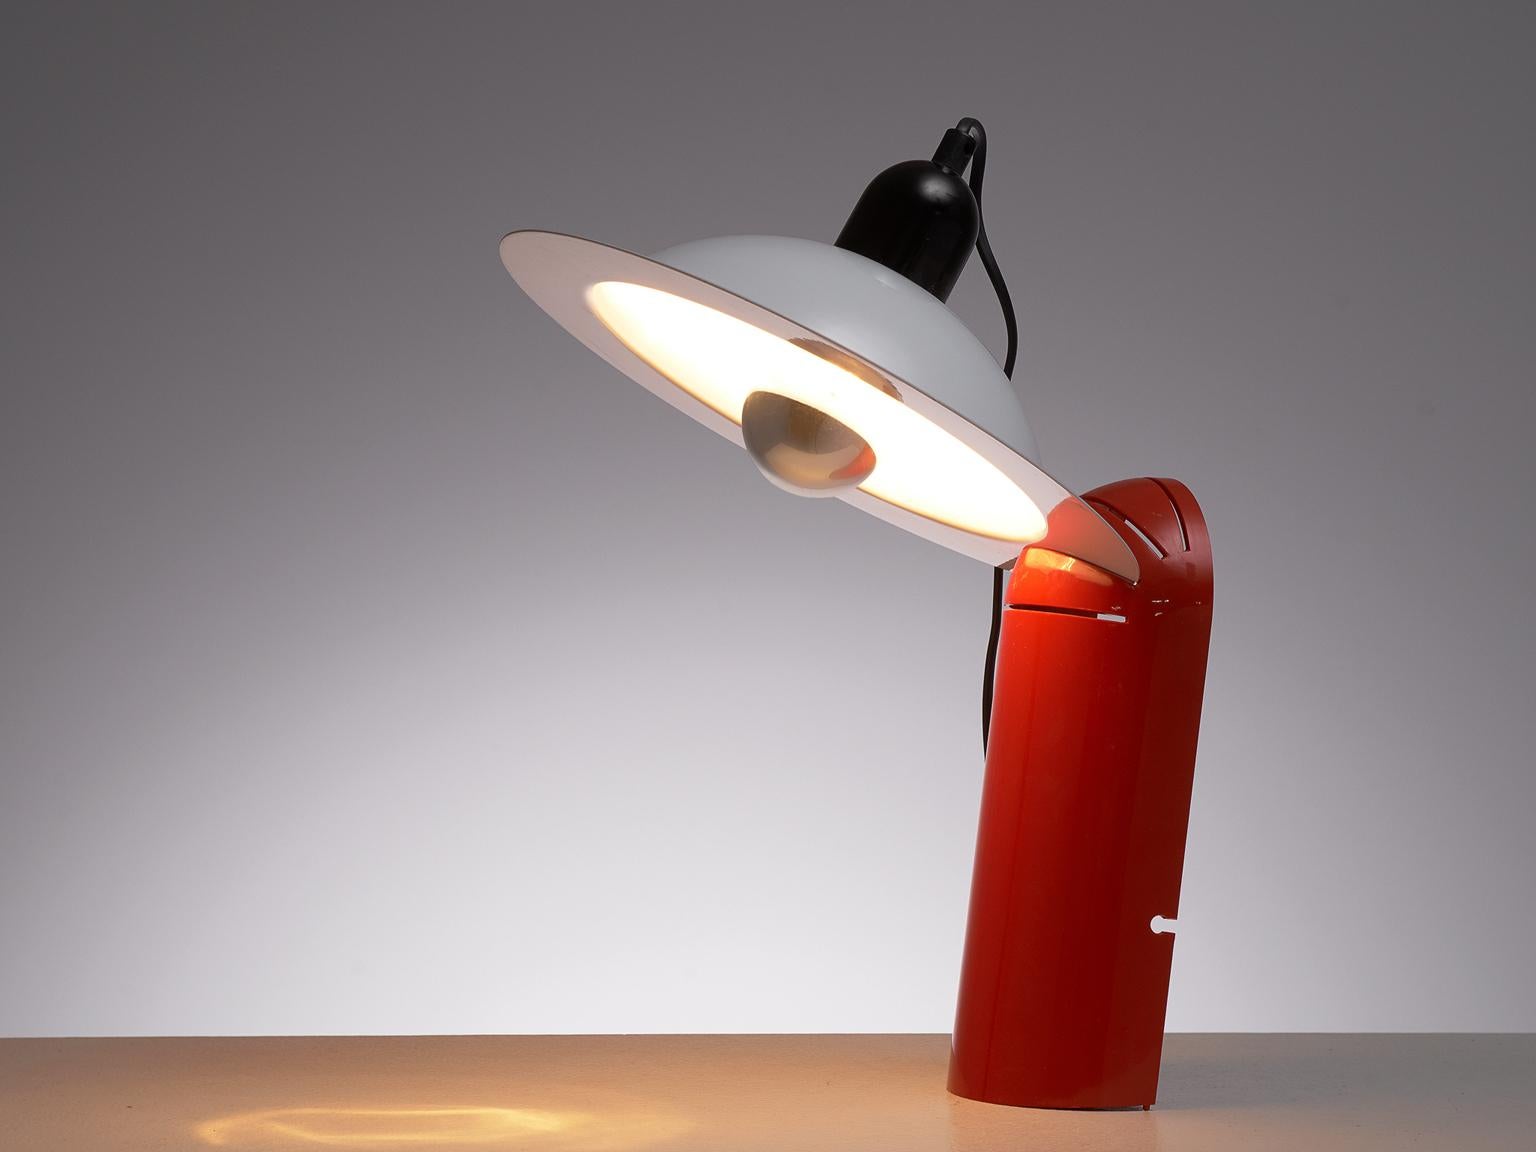 Jonathan de Pas, Donato d'Urbino, and Paolo Lomazzi for Stilnovo, lampiatta table lamp, Italy, 1971. 

It is made from lacquered metal and plastic and the lampshade can be moved to create different illumination effects. Bottom part in red. The